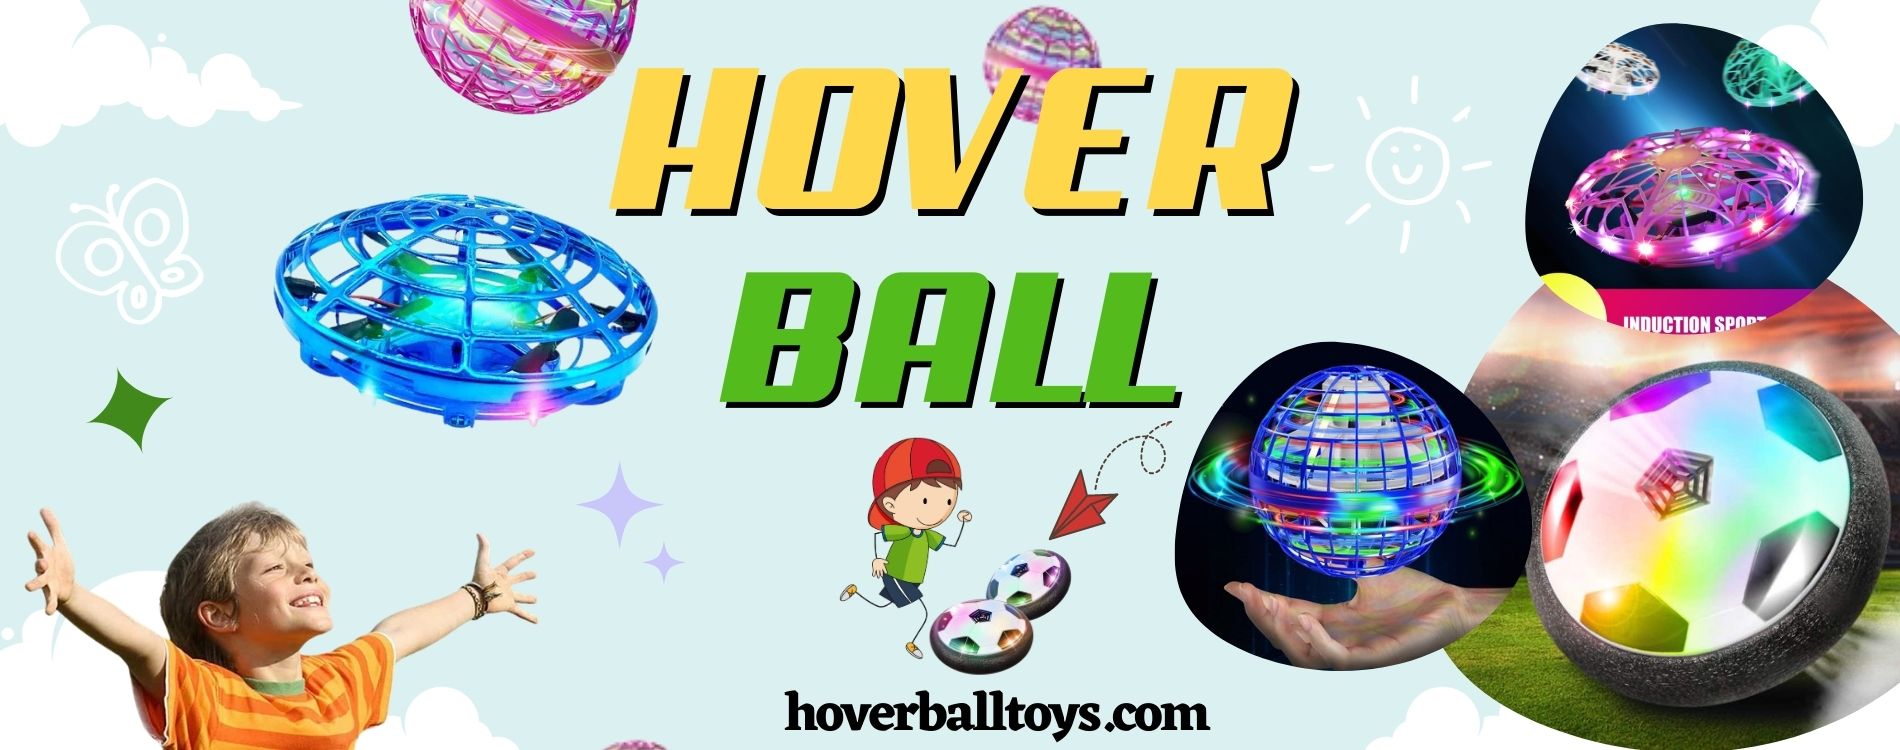 Banner hover ball